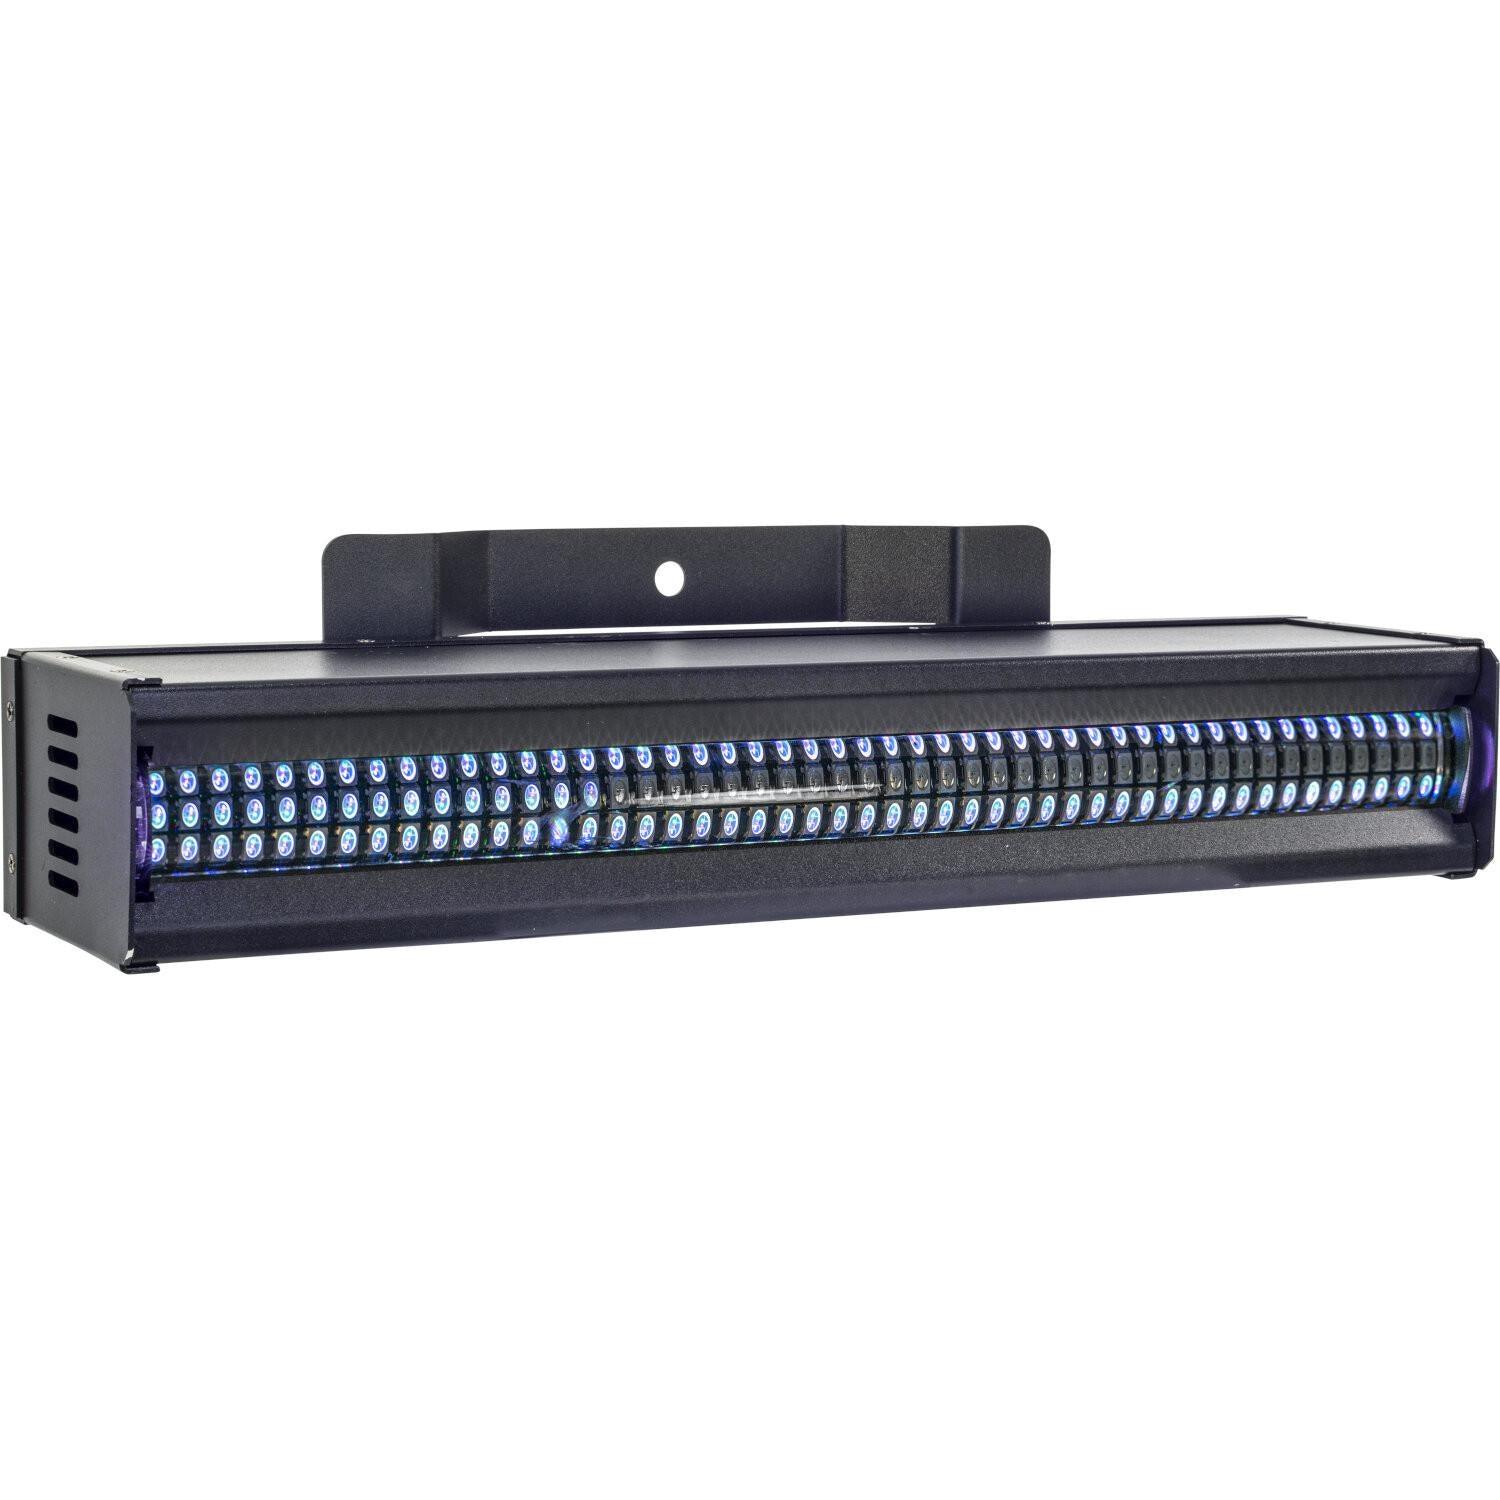 AFX K2000FX Pixel Light Bar with 144 3-in-1 RGB LEDs Lighting Effect - DY Pro Audio